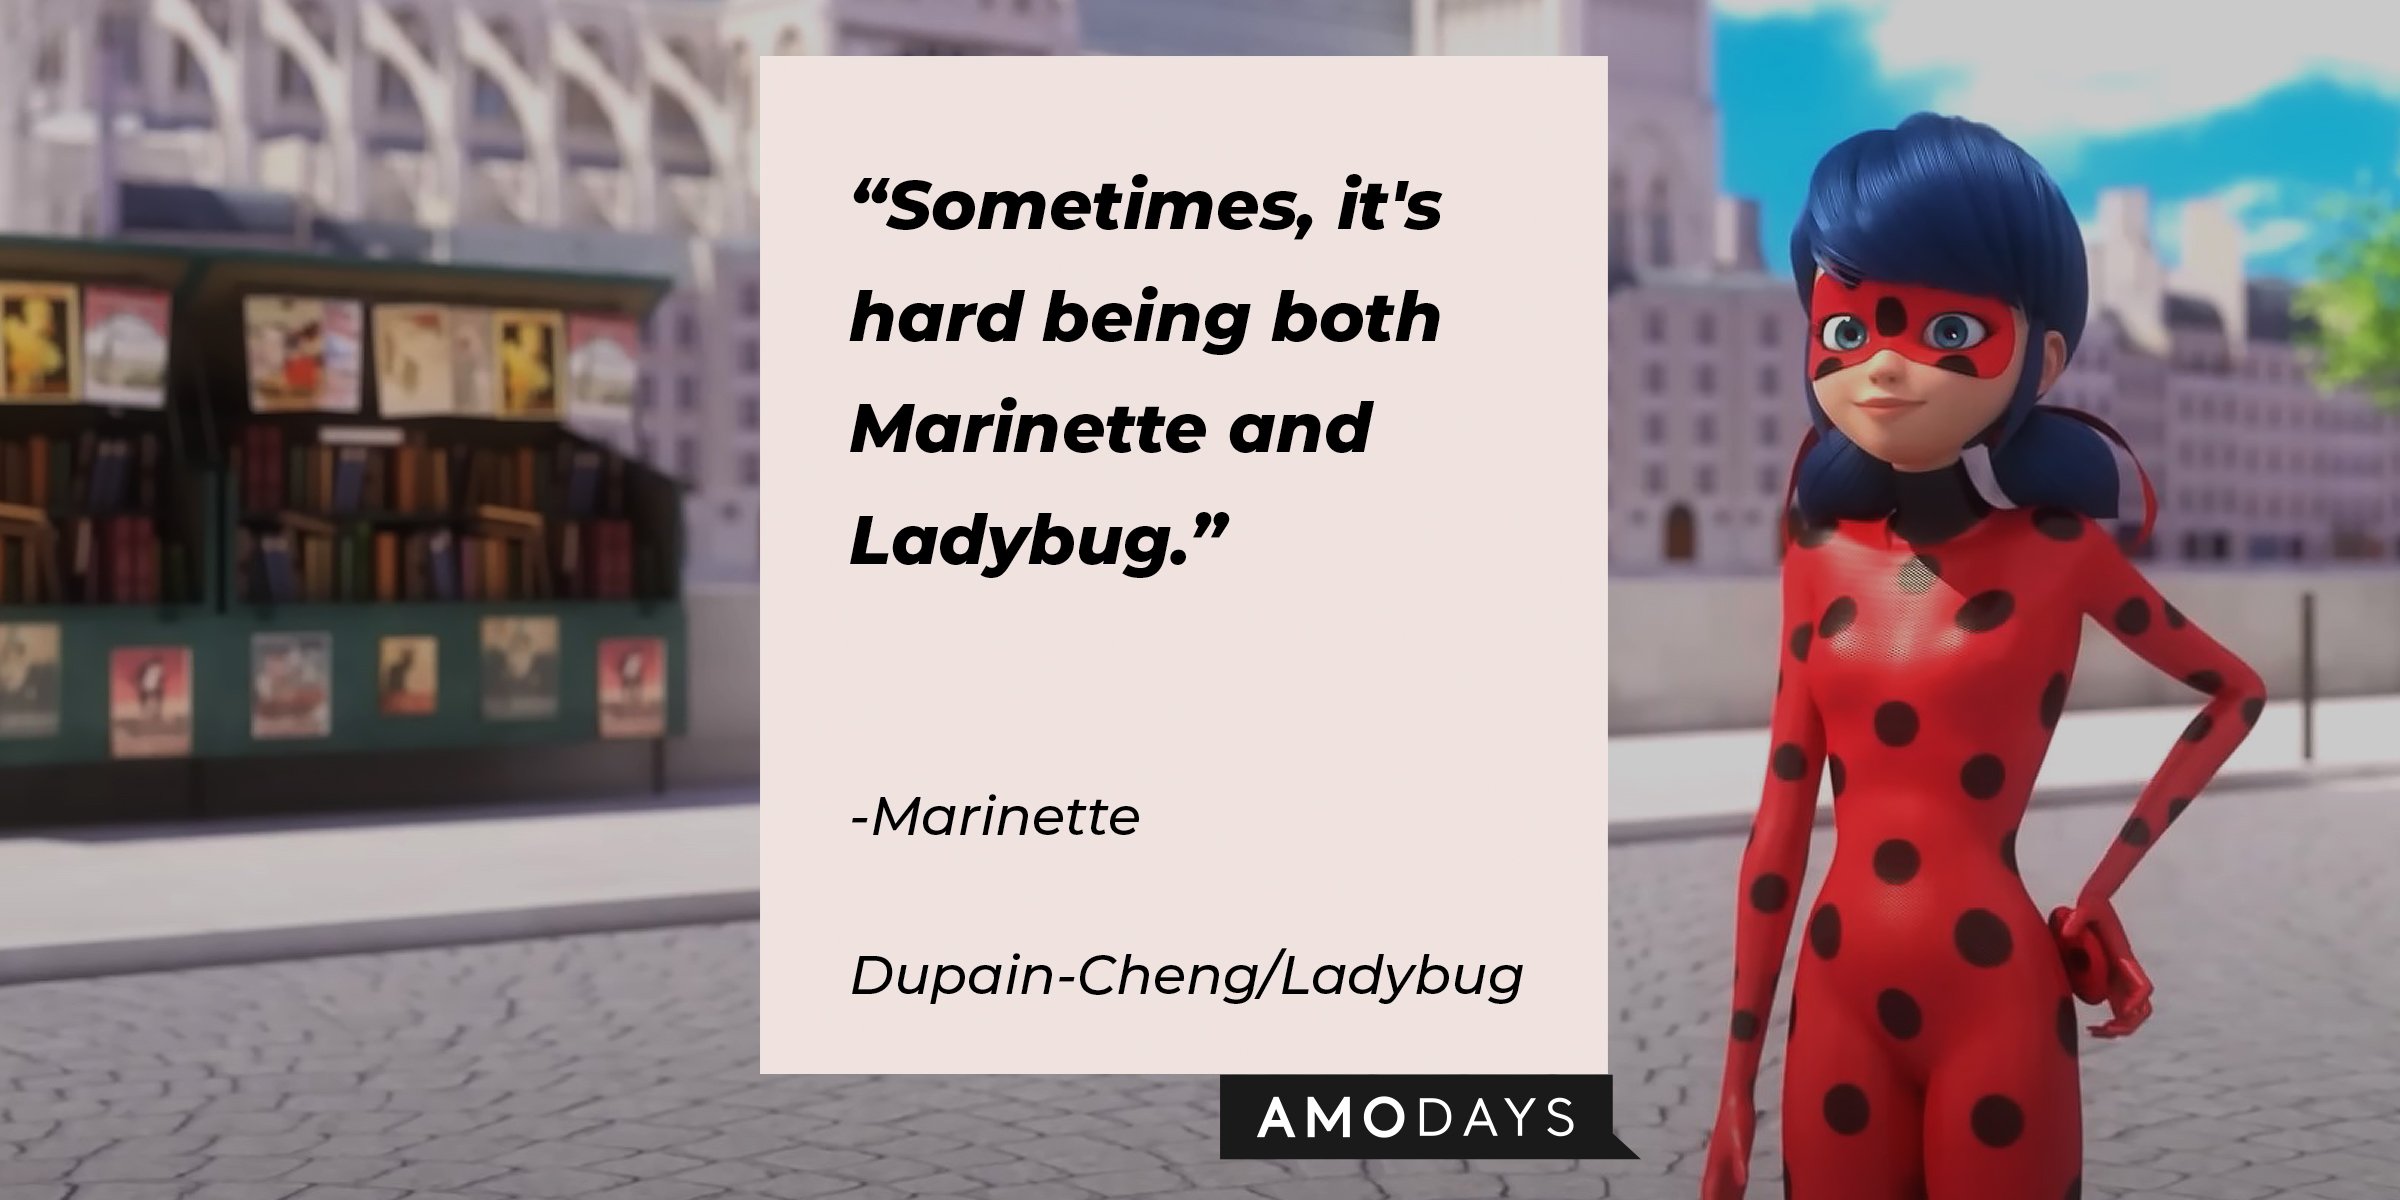 youtube.com/miraculousladybug | A picture of Marinette Dupain-Cheng as her superhero persona Ladybug with a quote by her reading, "Sometimes, it's hard being both Marinette and Ladybug."